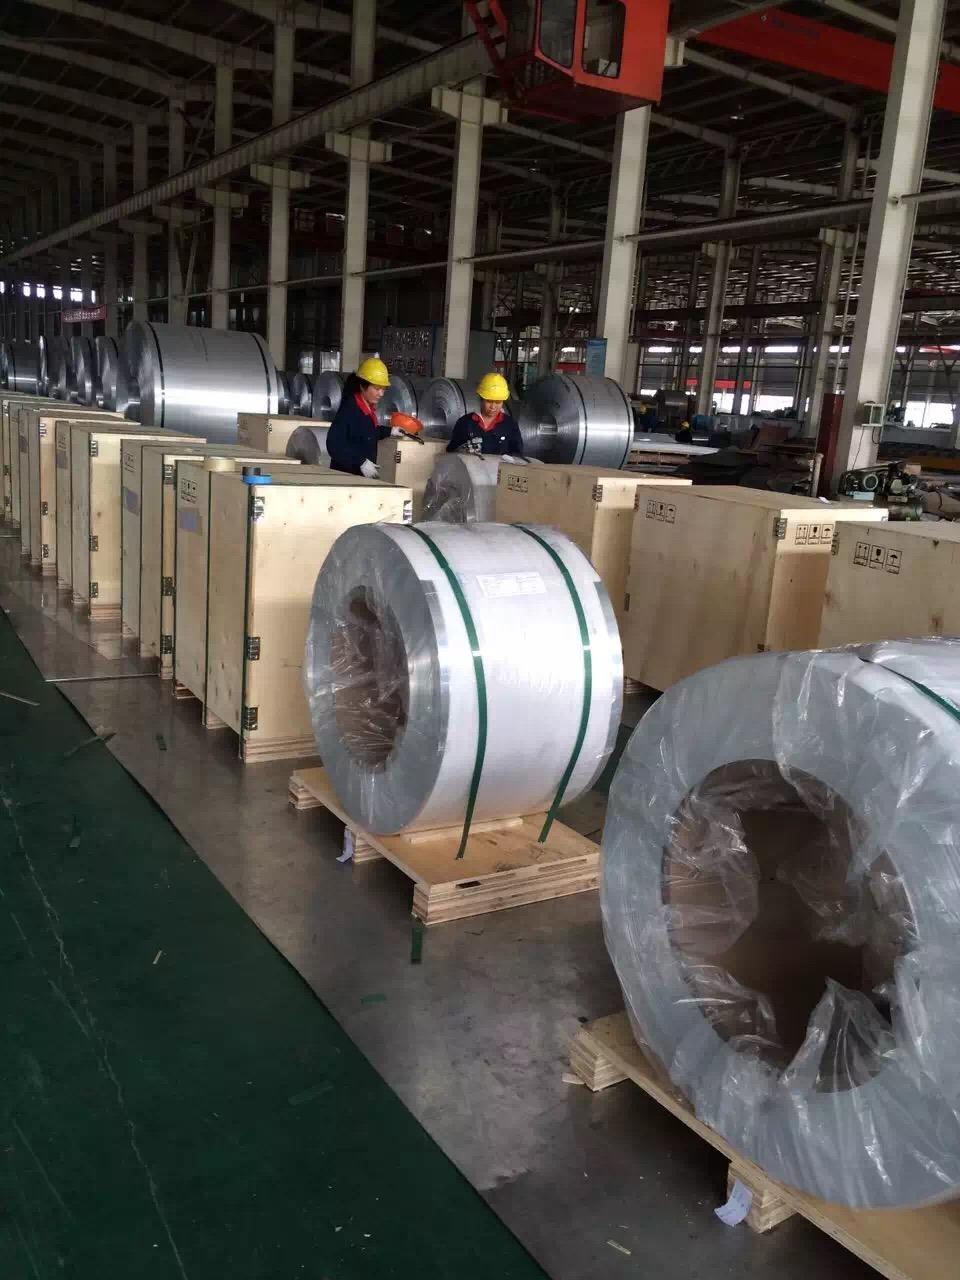 Cold Rolled Aluminum Alloy Sheet 5083